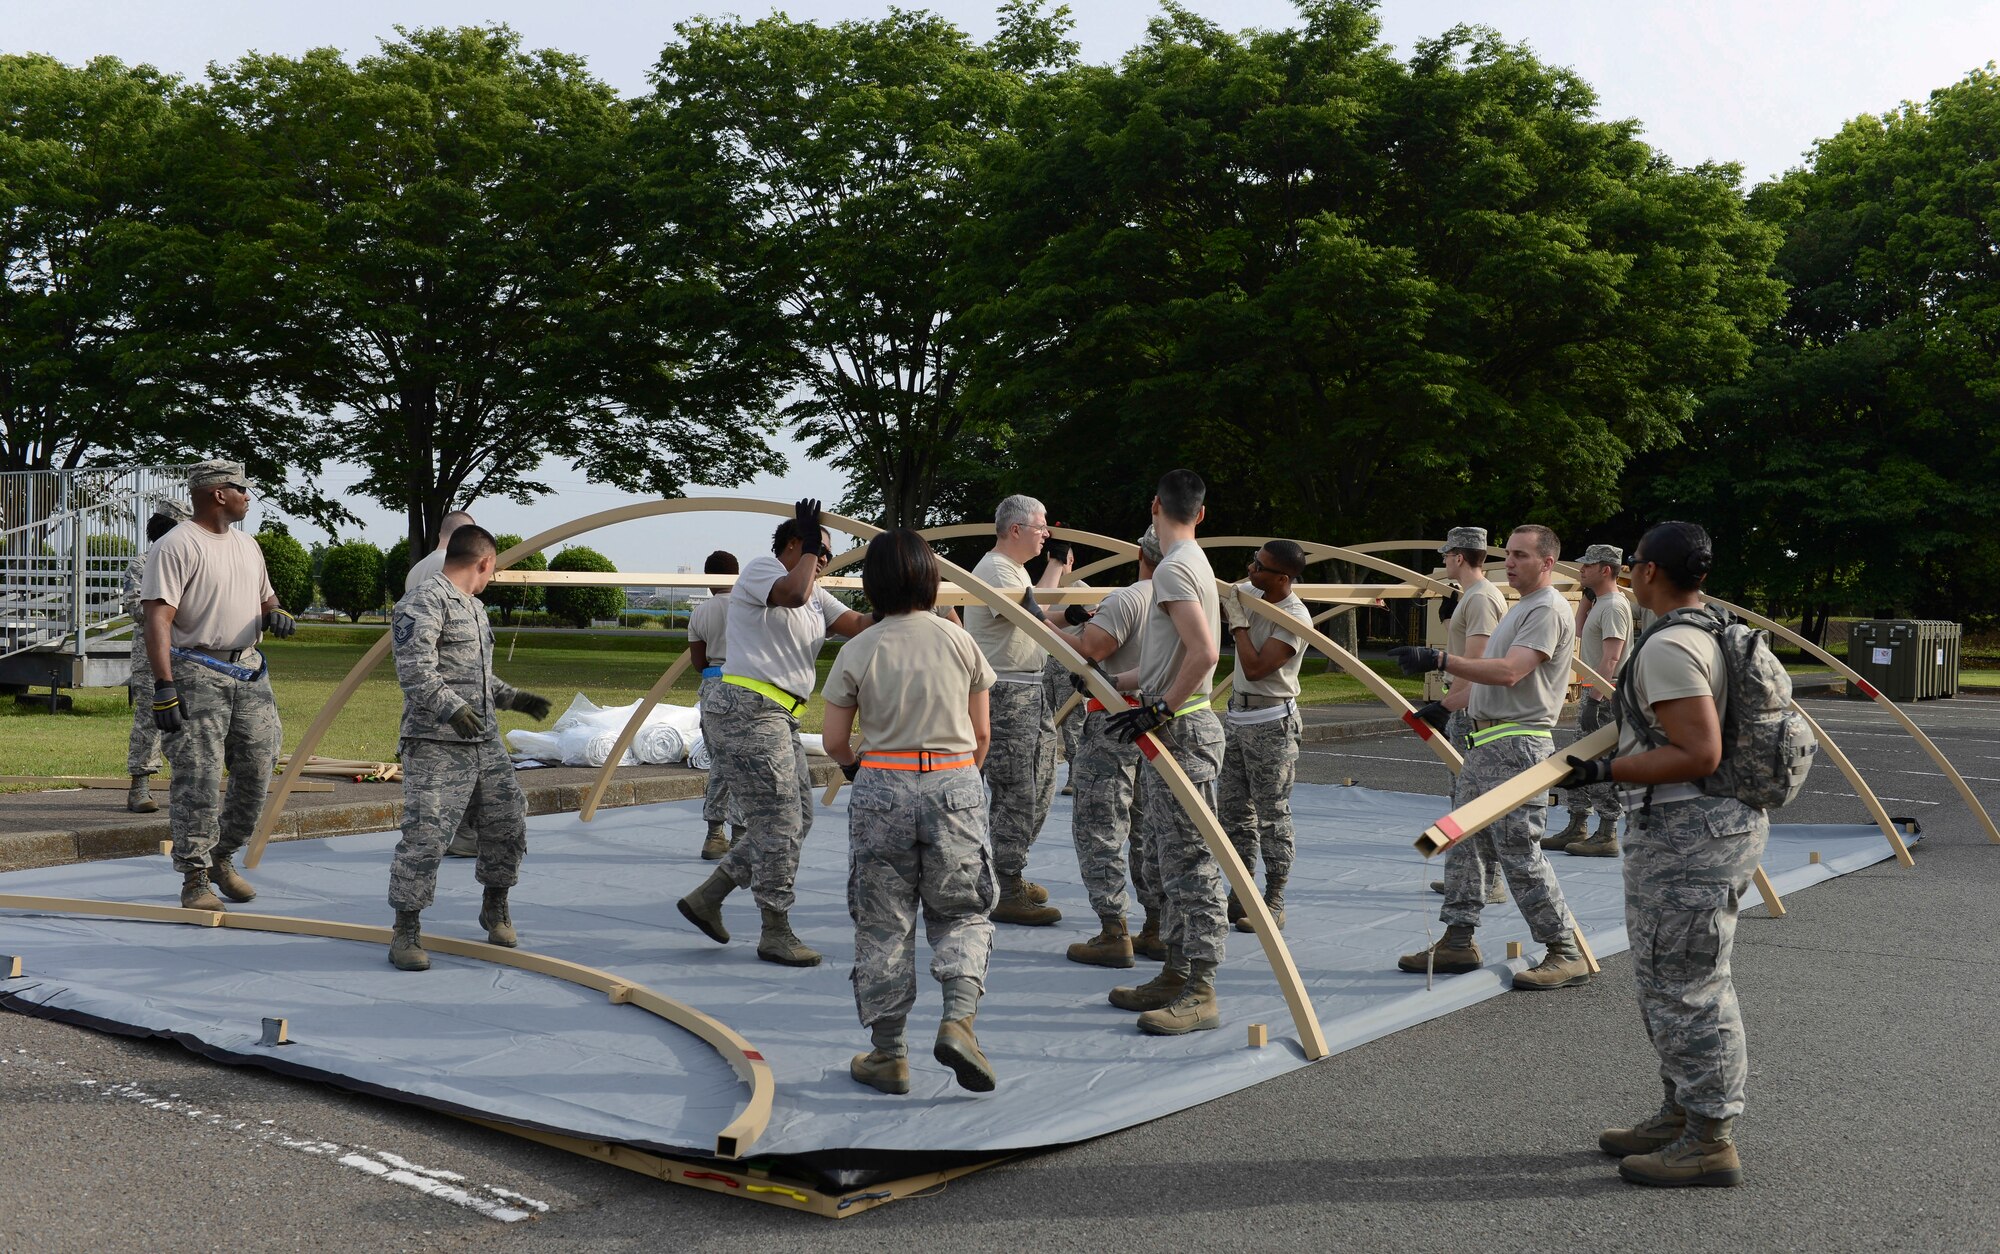 Airmen from the 374th Medical Group assemble an Expeditionary Medical Support tent at Yokota Air Base, Japan, May 14, 2014.  An EMEDS tent allows medical personnel to treat patients during a contingency. (U.S. Air Force photo by Airman 1st Class Meagan Schutter/Released)